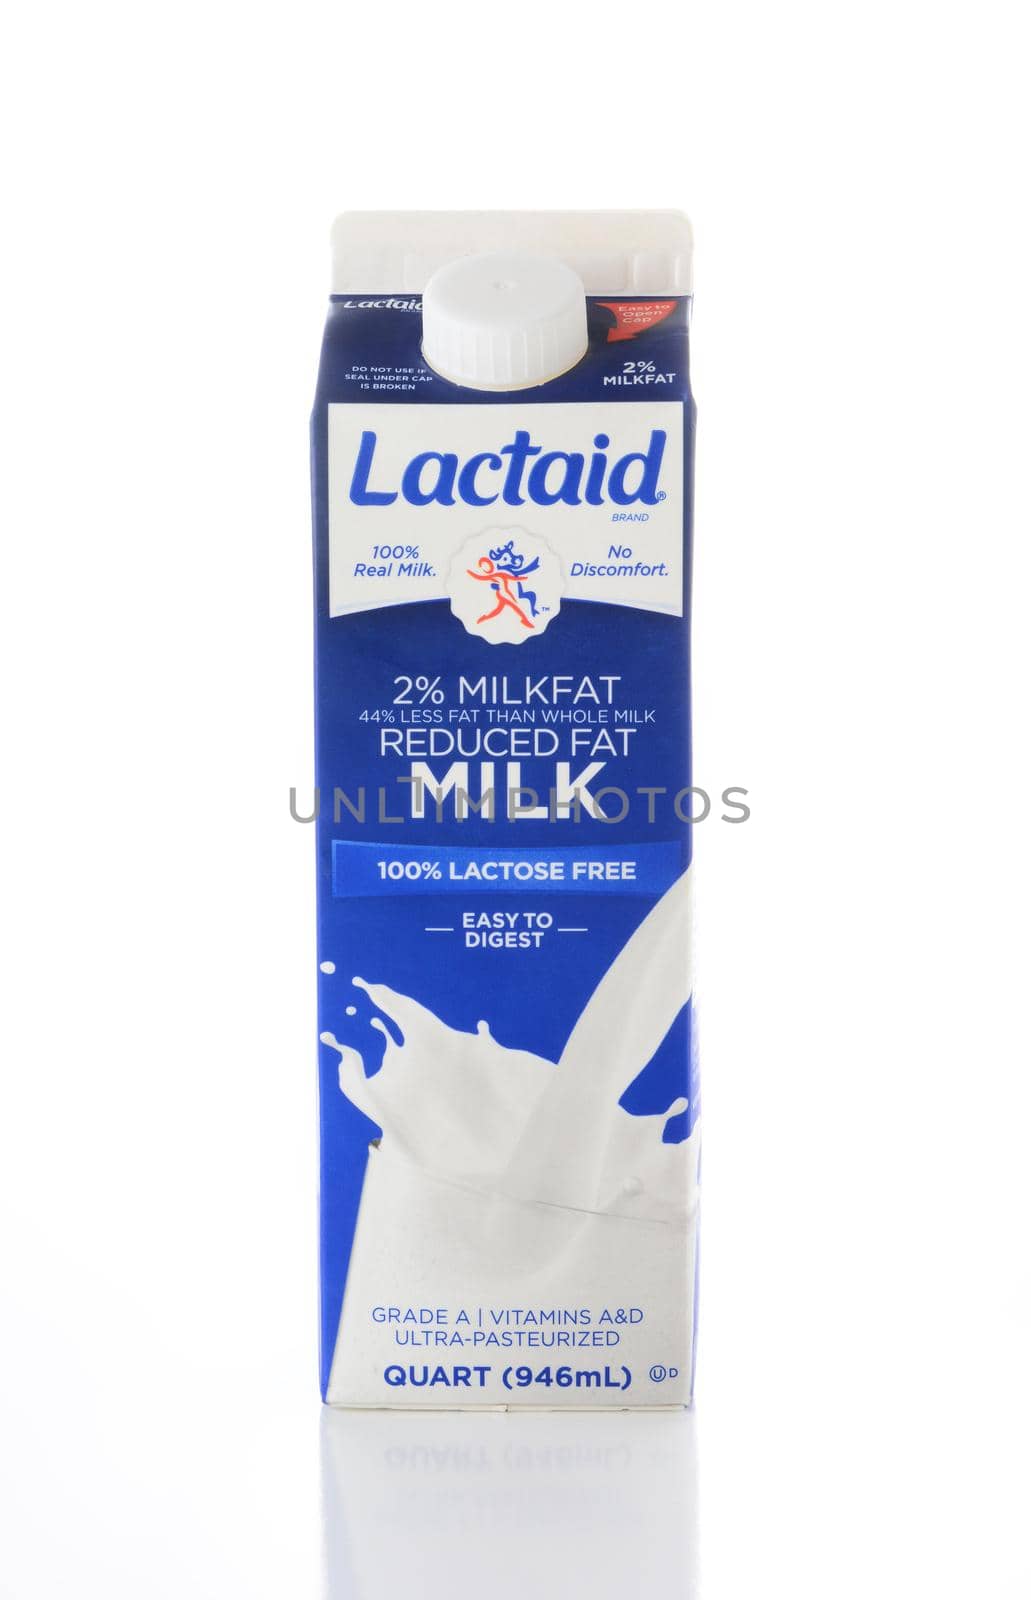 IRVINE, CA - JUNE 2, 2015: Closeup of a carton of Lactaid 2% Reduced Fat Lactose Free Milk. Lactaid makes a full line of lactose free dairy products that can be enjoyed without stomach discomfort.